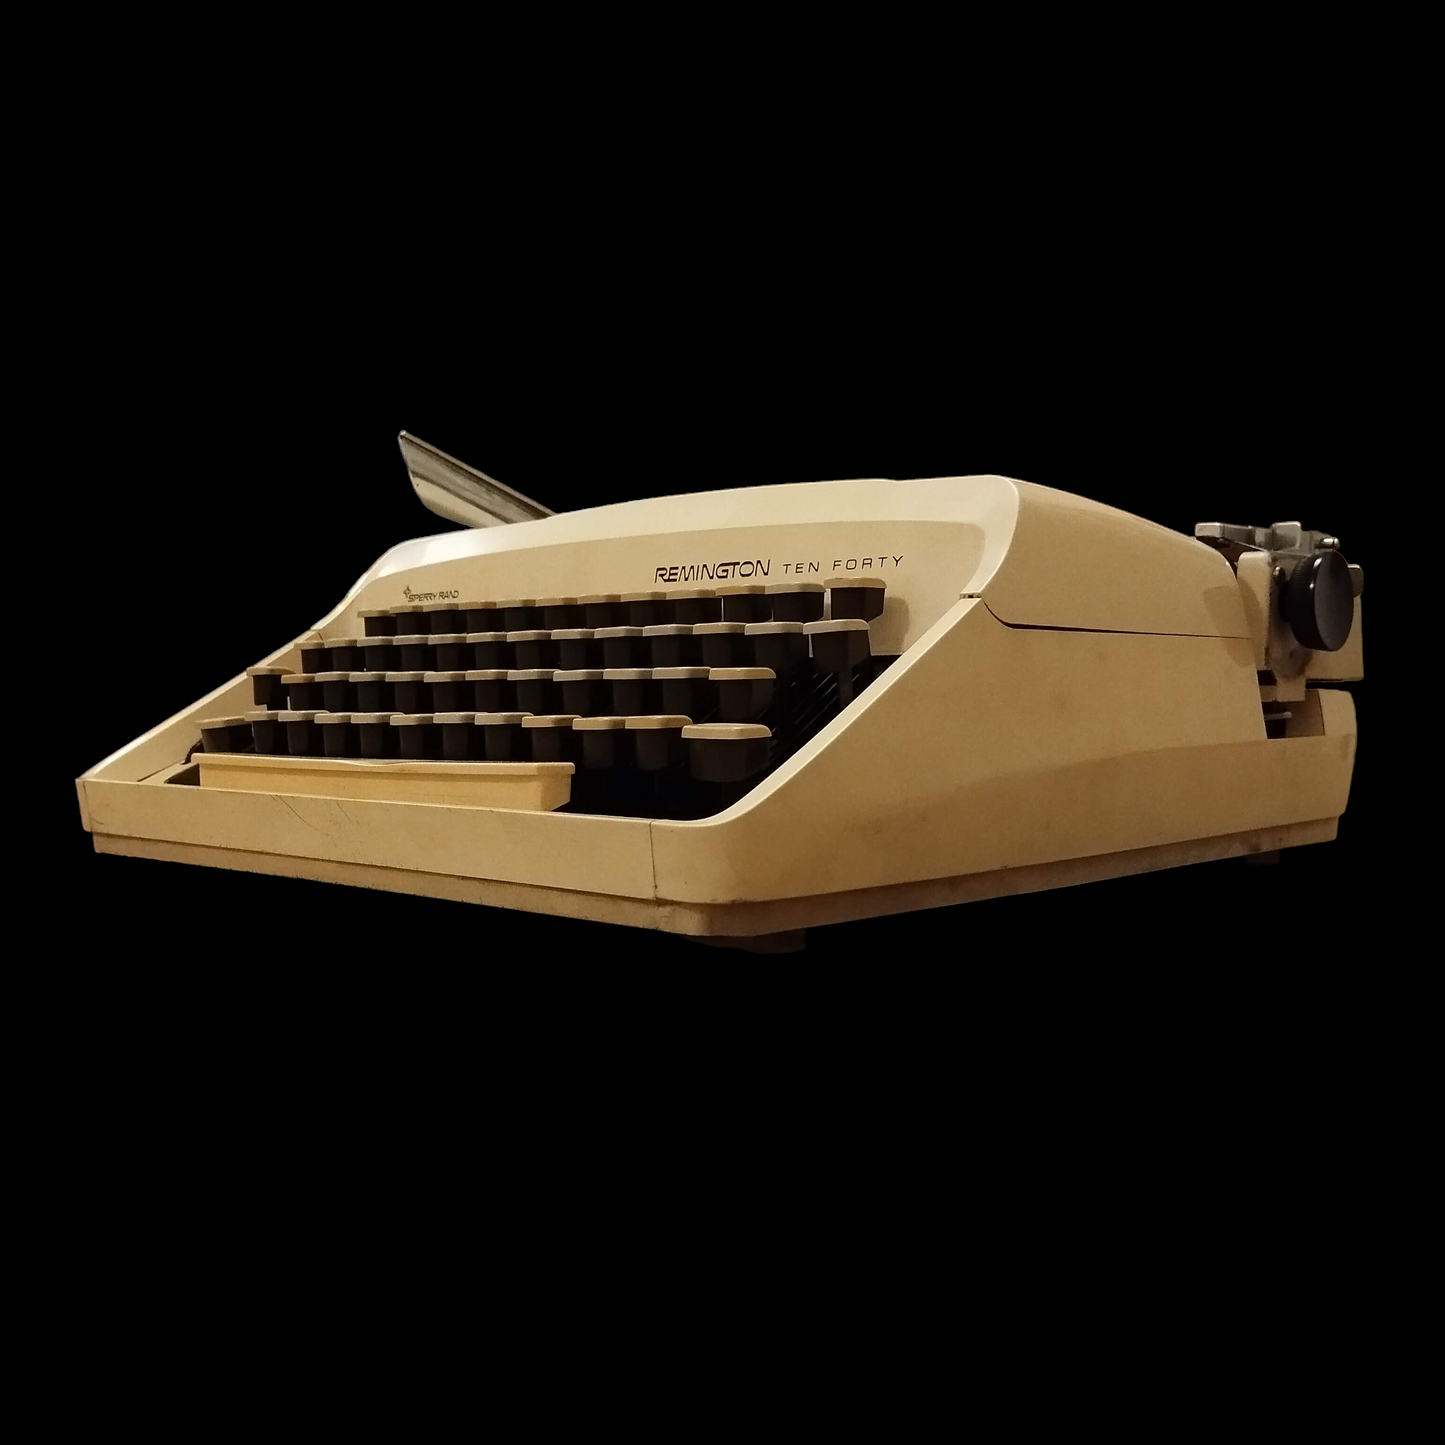 Image of Remington Ten Forty Sperry Rand Typewriter. Available at universaltypewritercompany.in